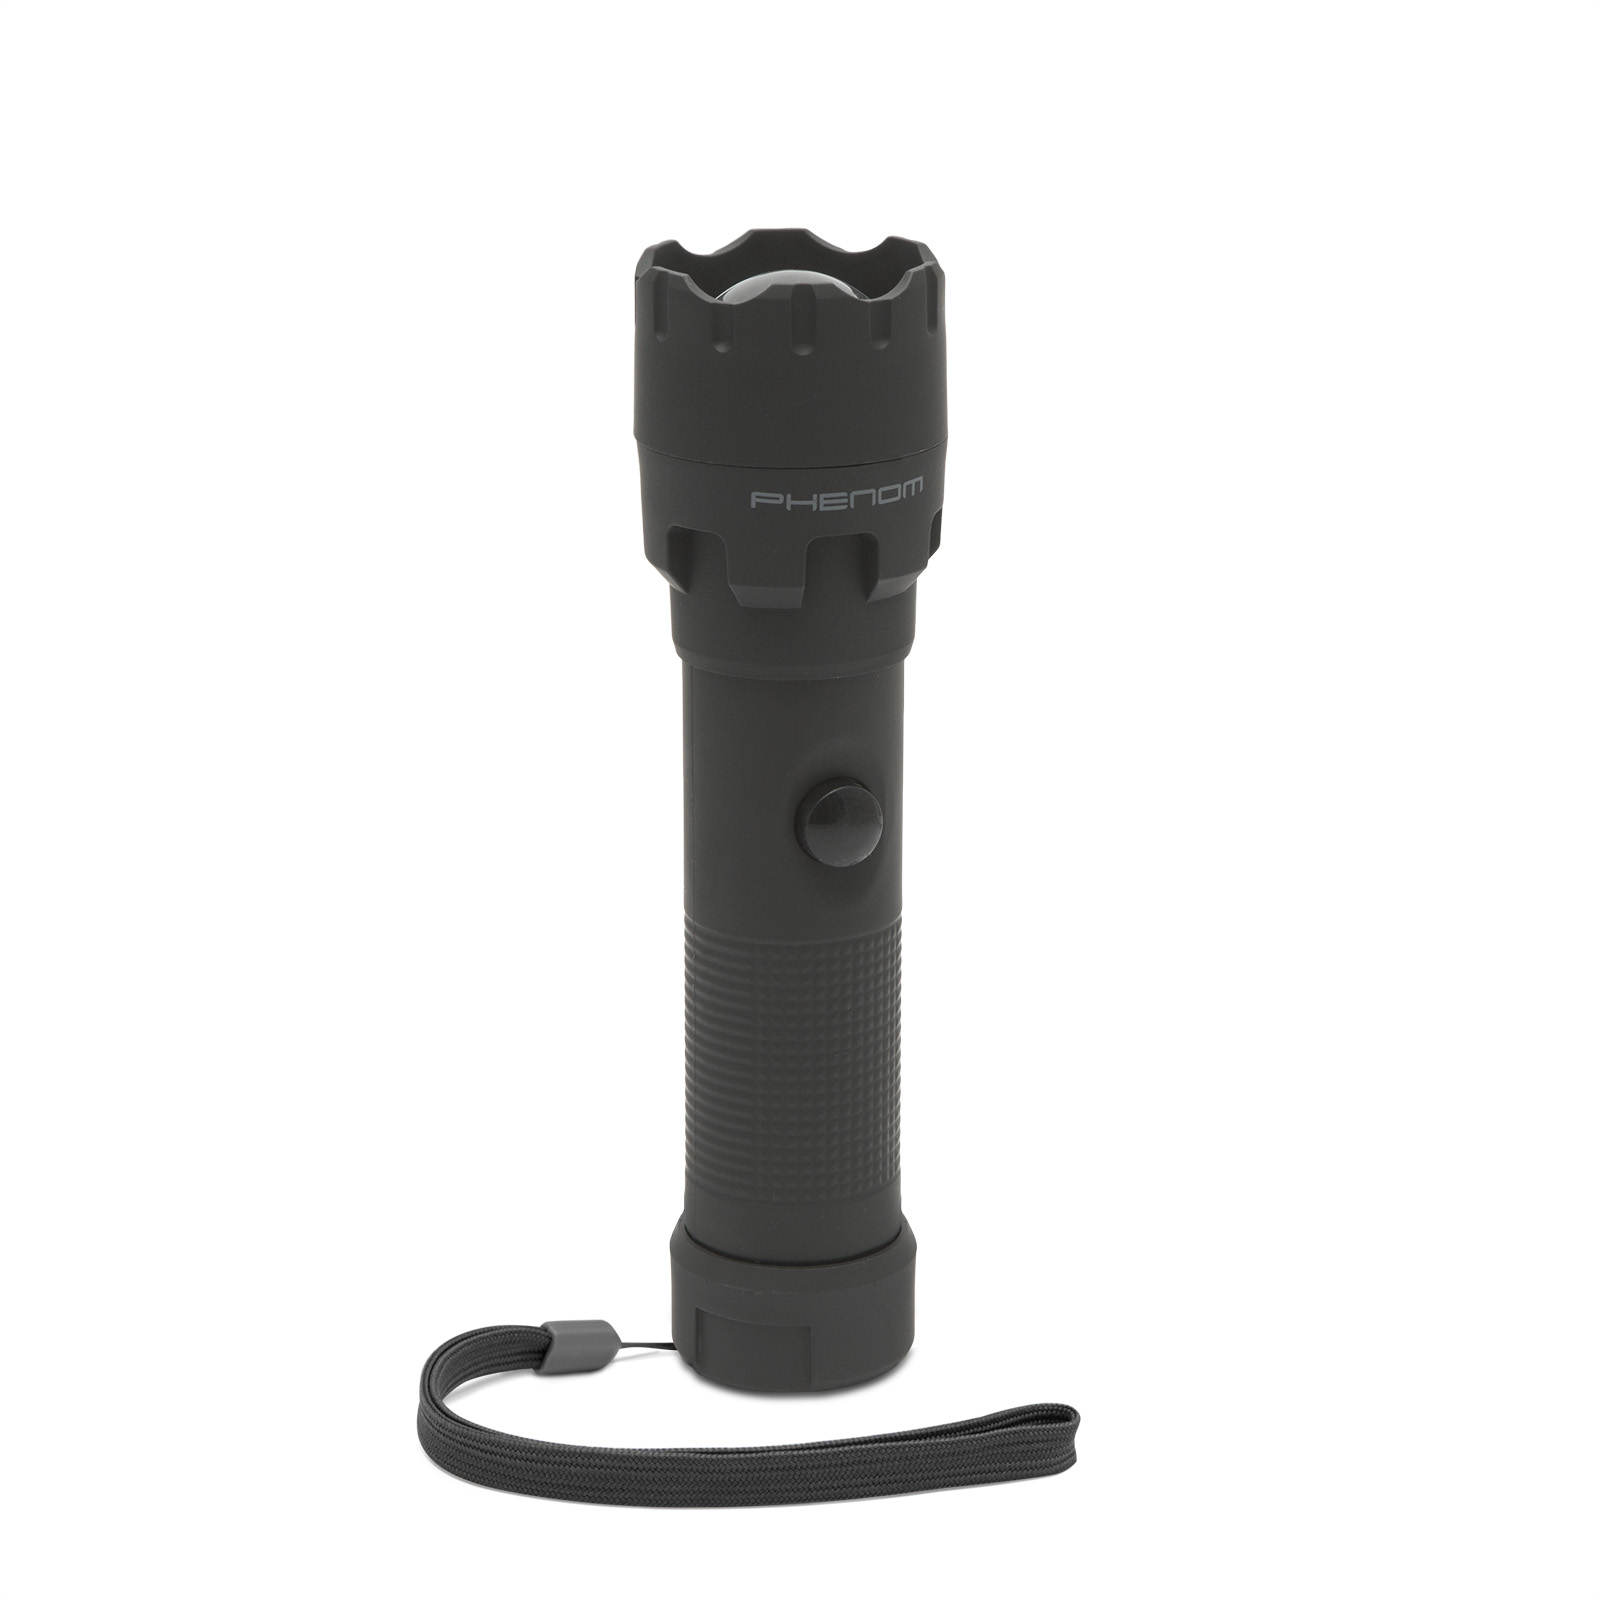 SMD LED Flashlight with Focusing Lens thumb